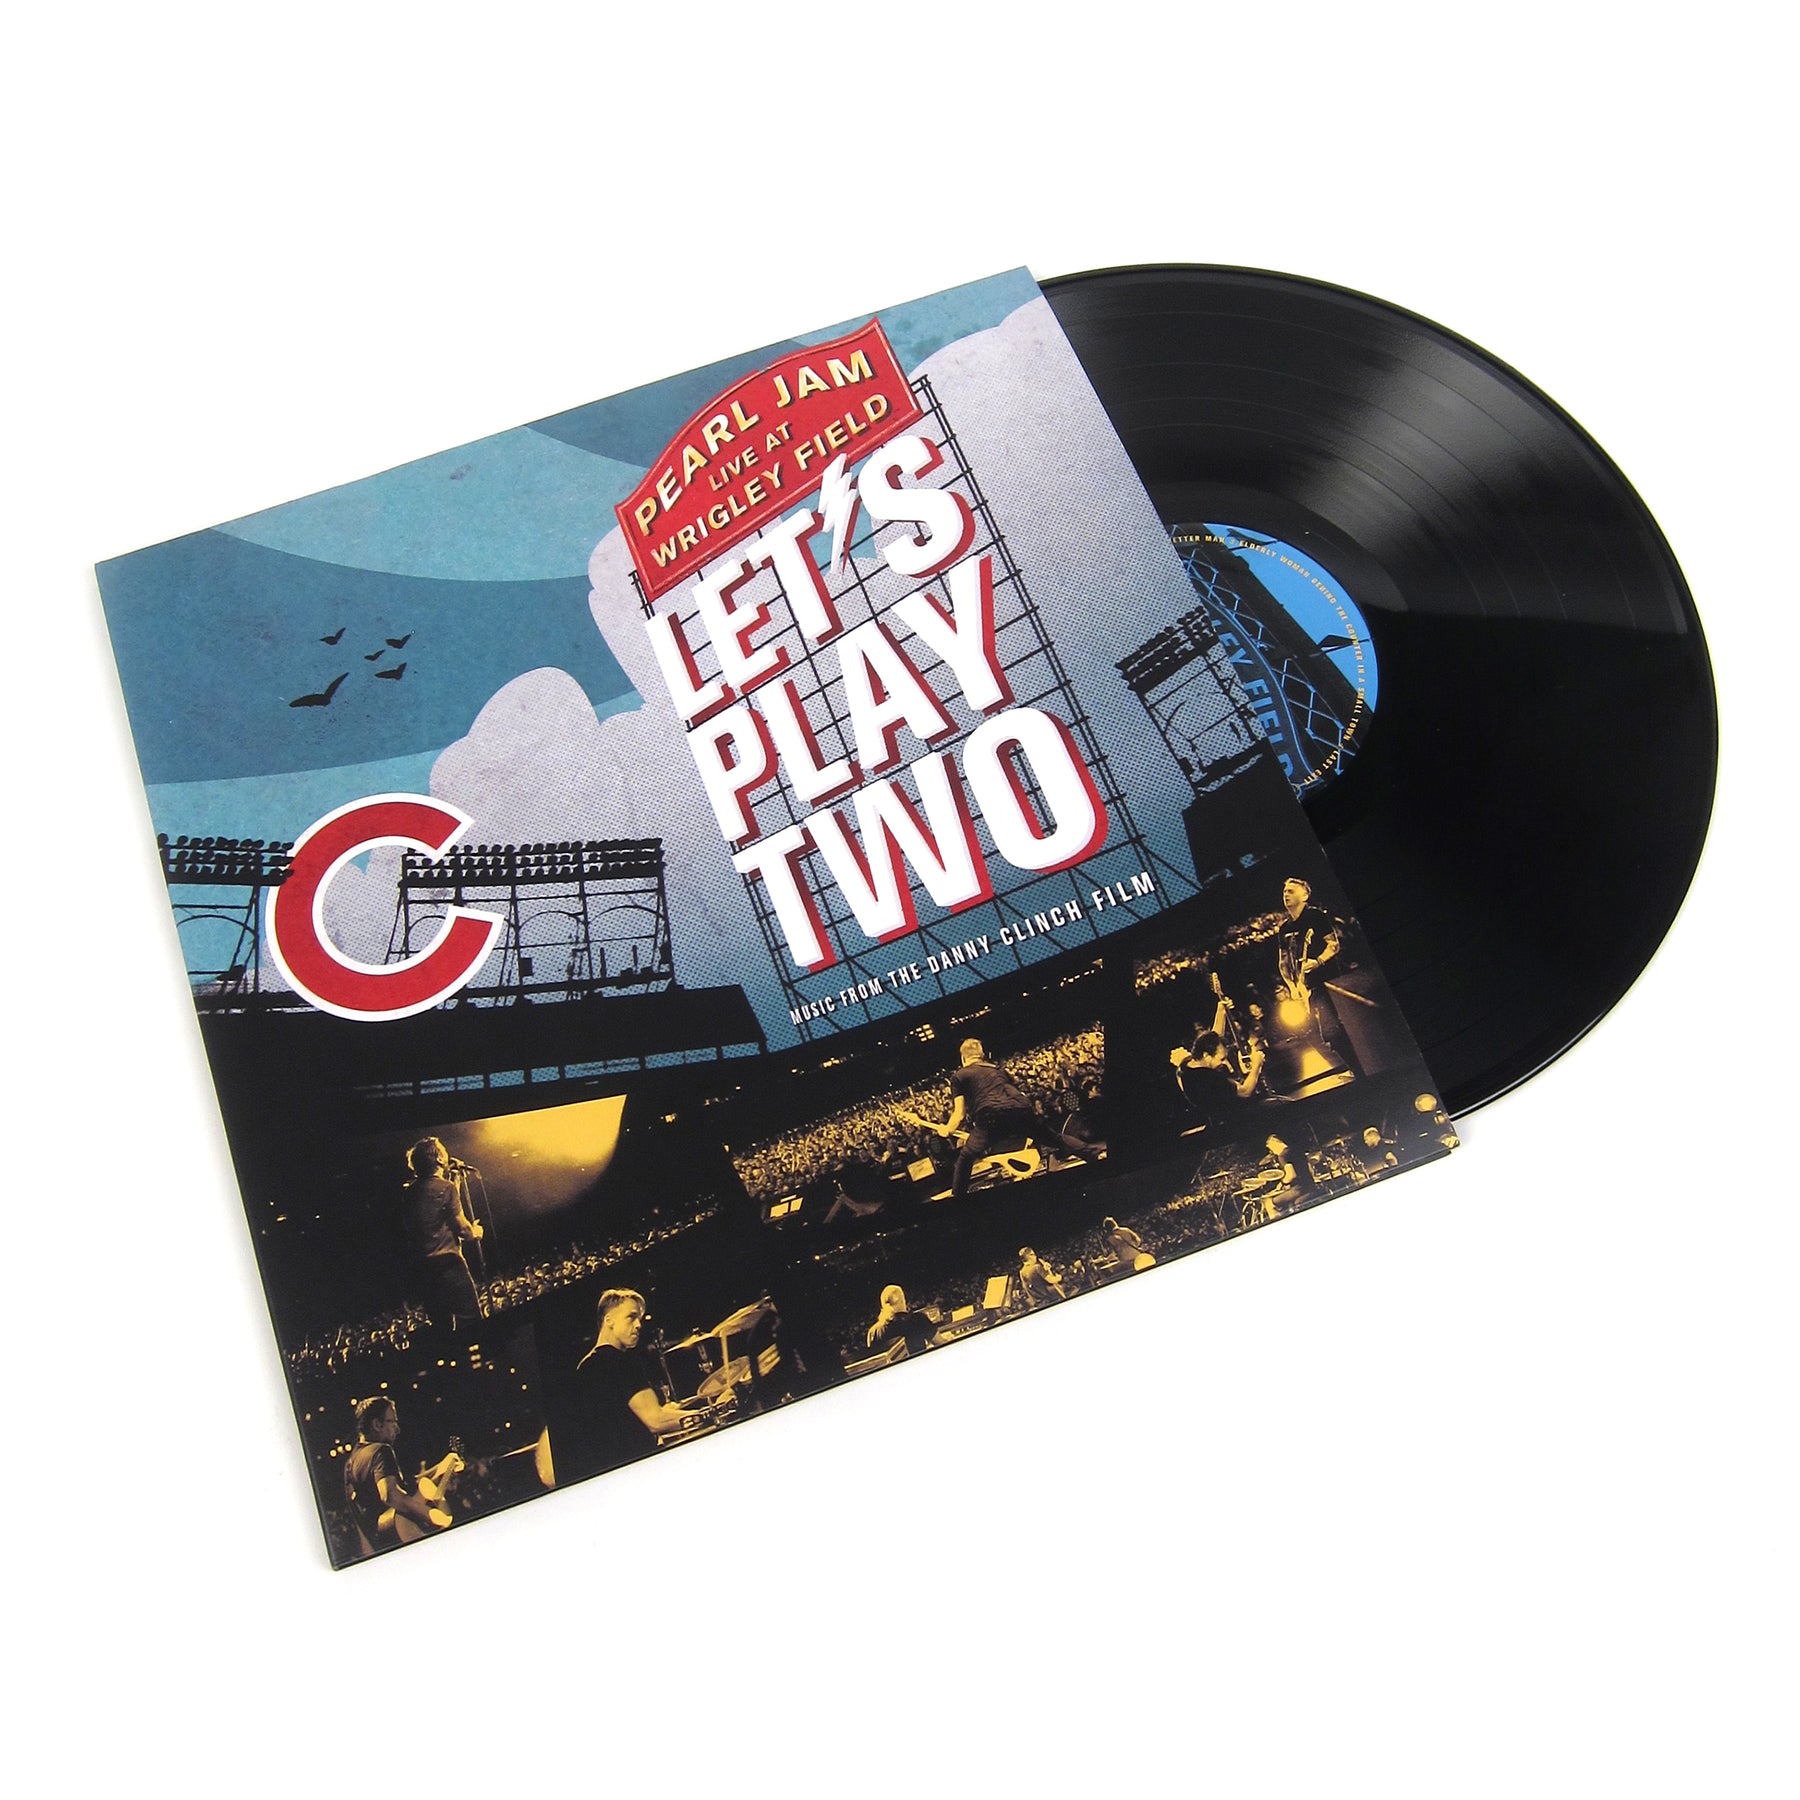 pearl jam lets play two cd